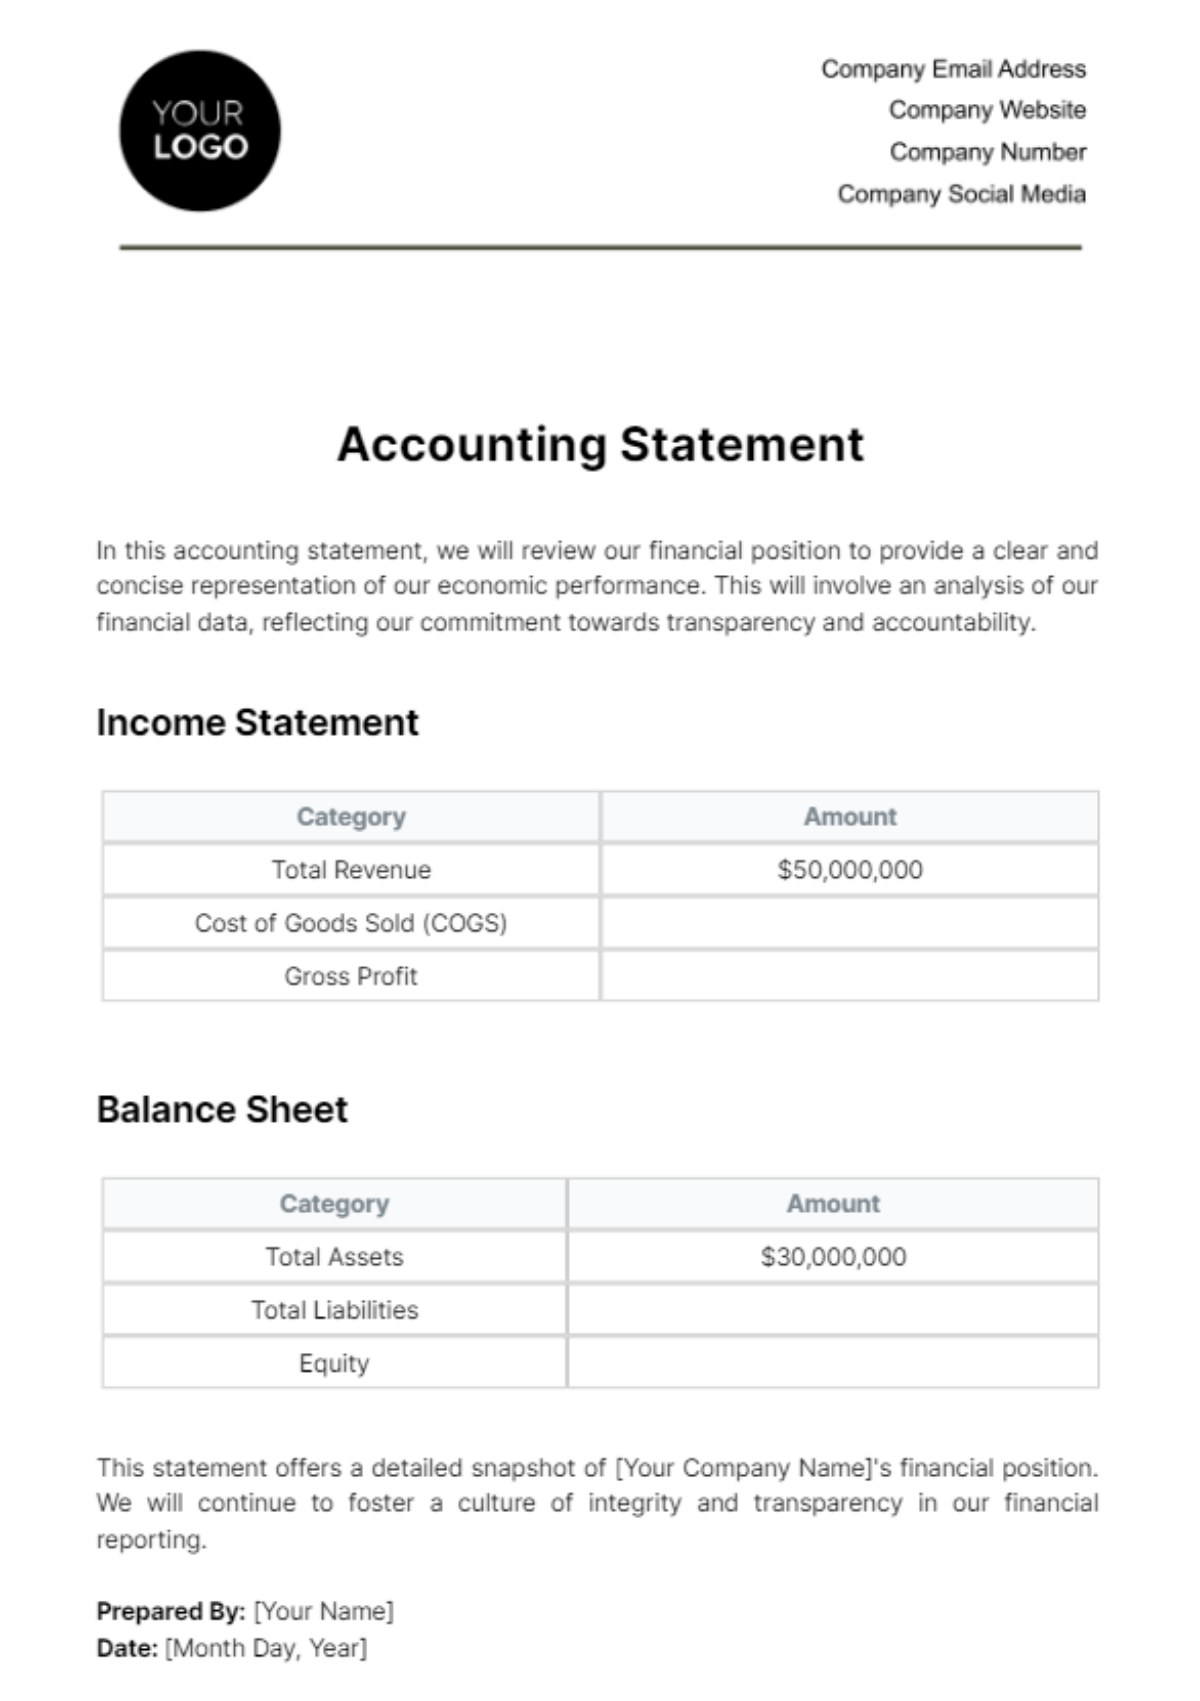 Accounting Statement Template